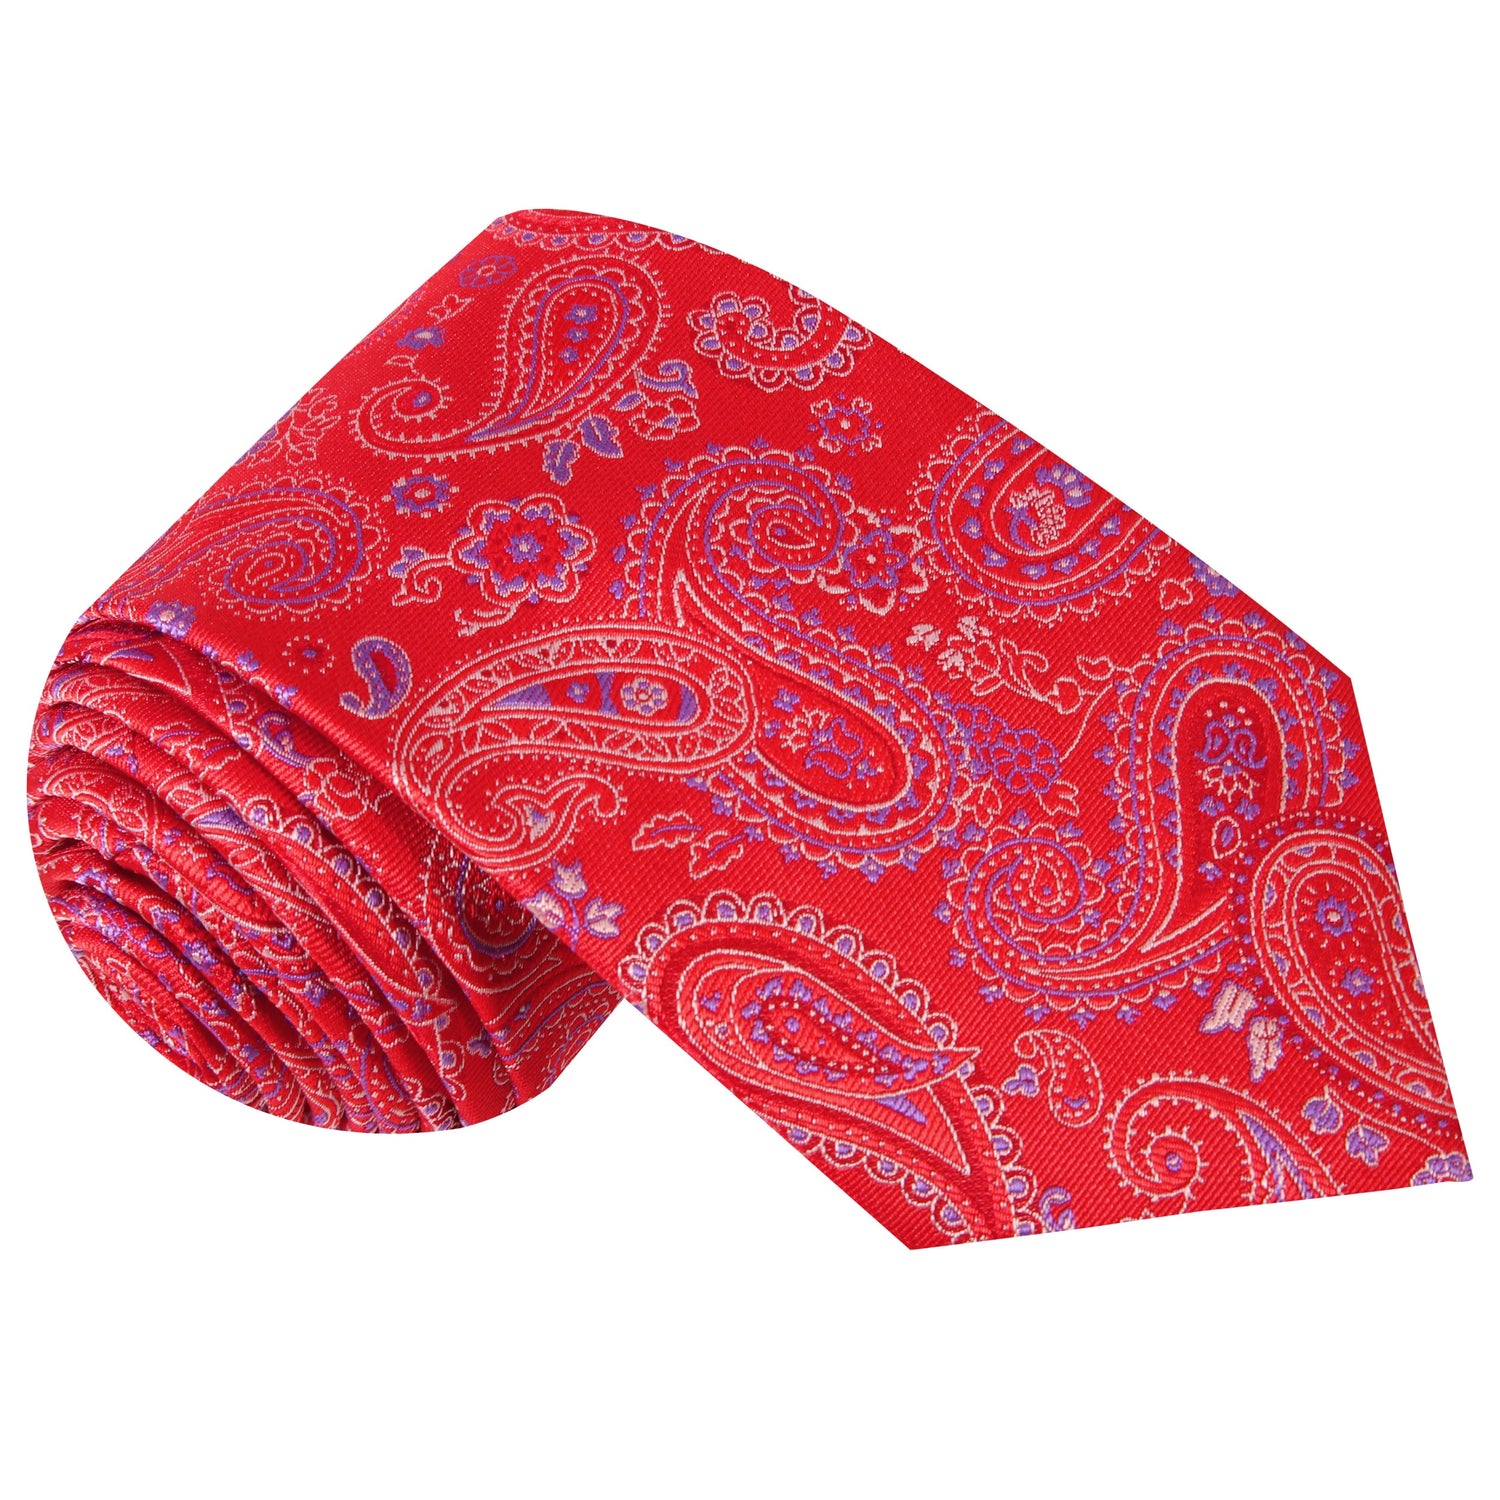 Tie Rolled Up View: Red, Light Purple Paisley Necktie